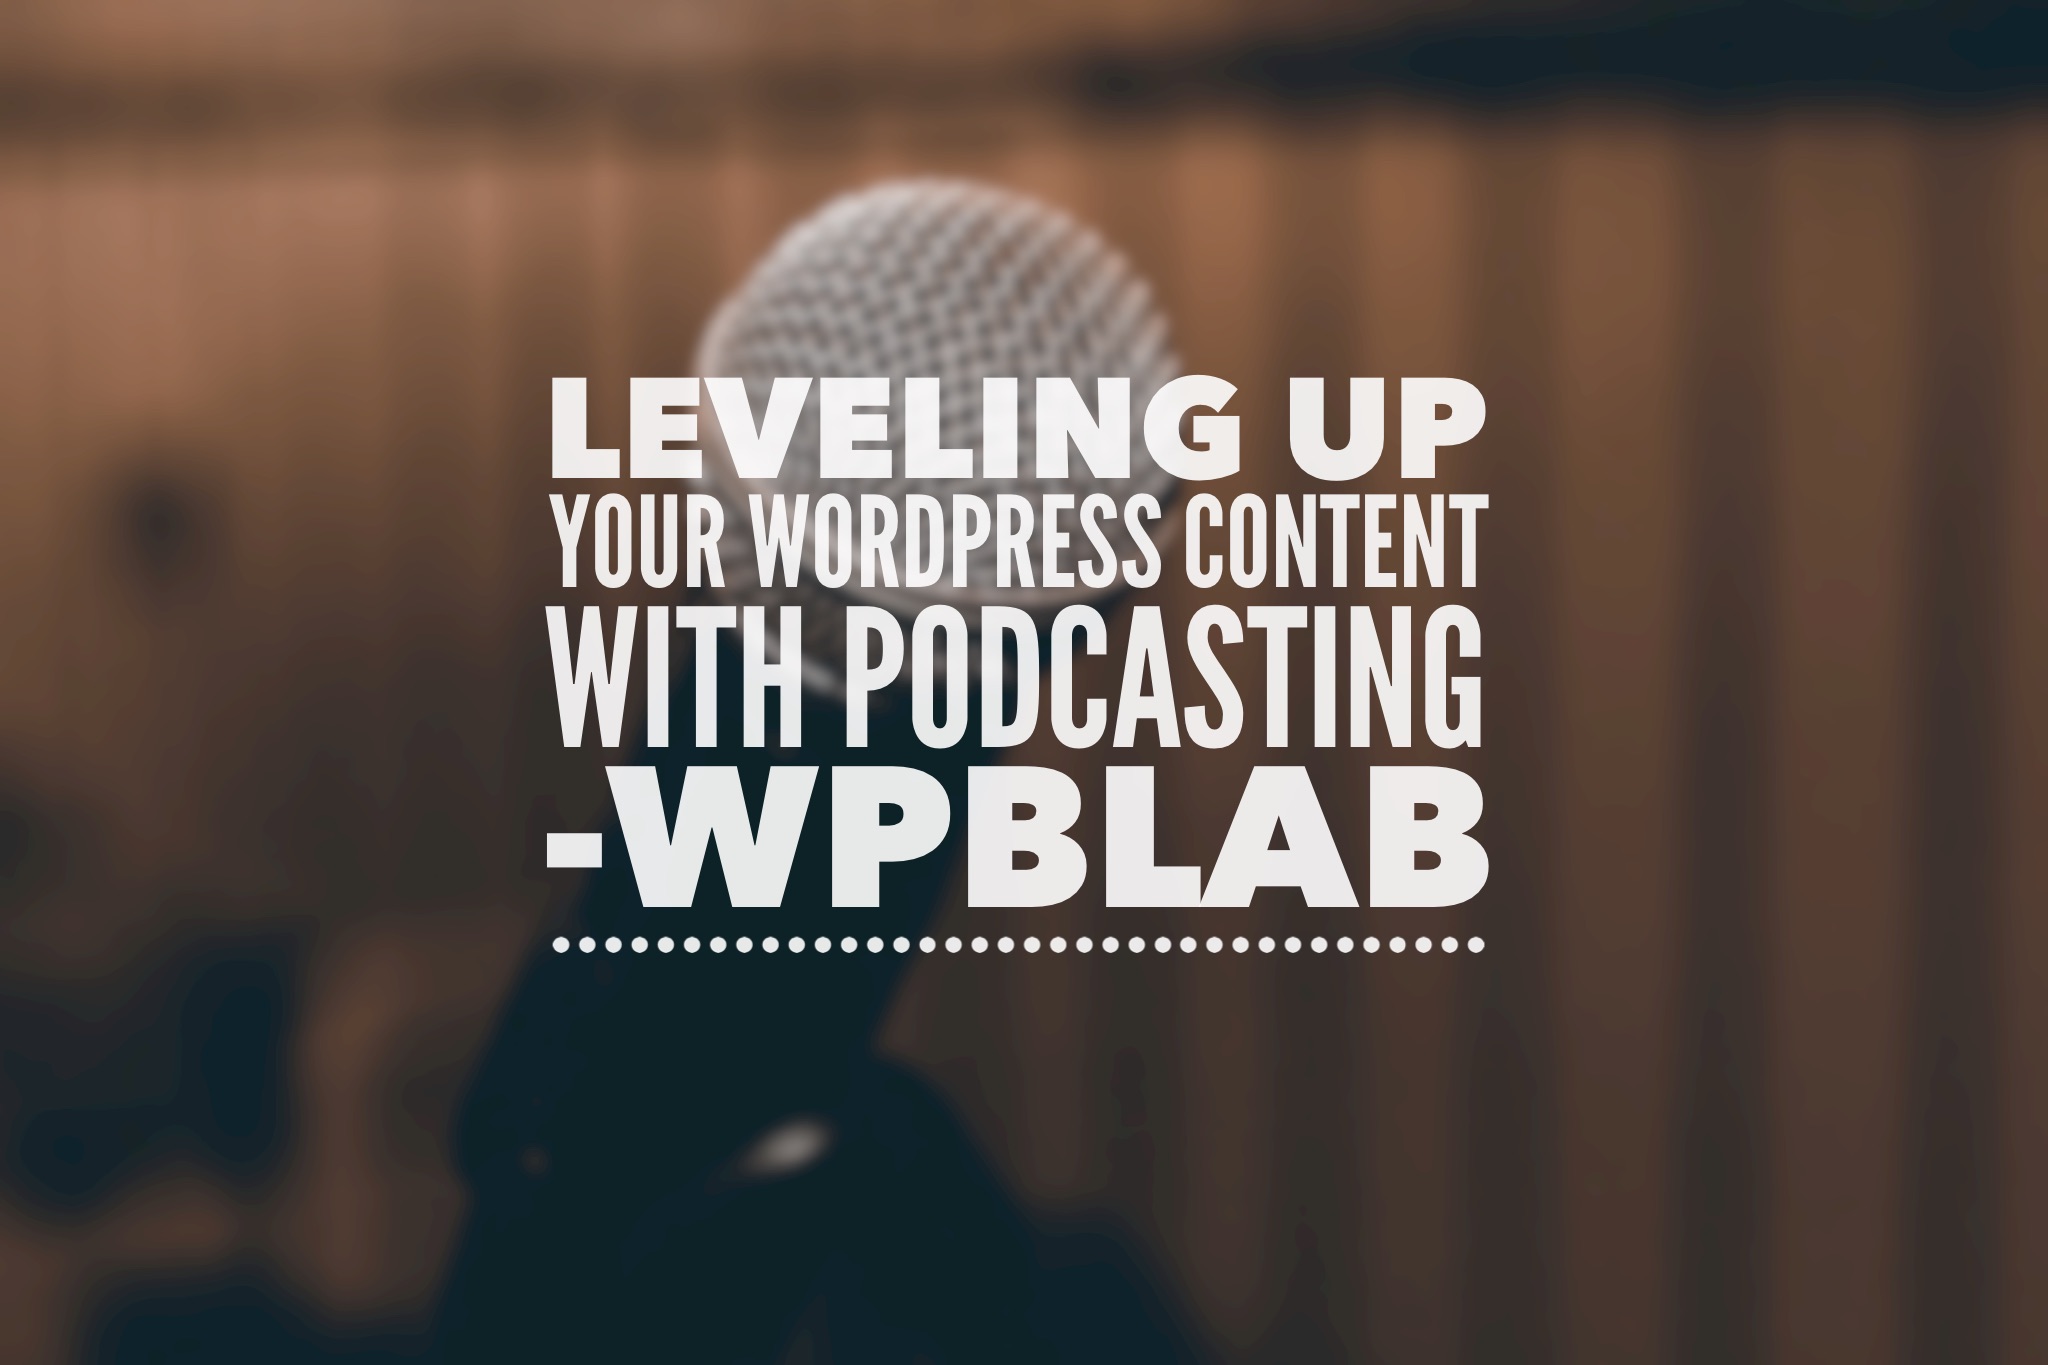 WPblab EP046 - Leveling up your WordPress content with podcasting 1